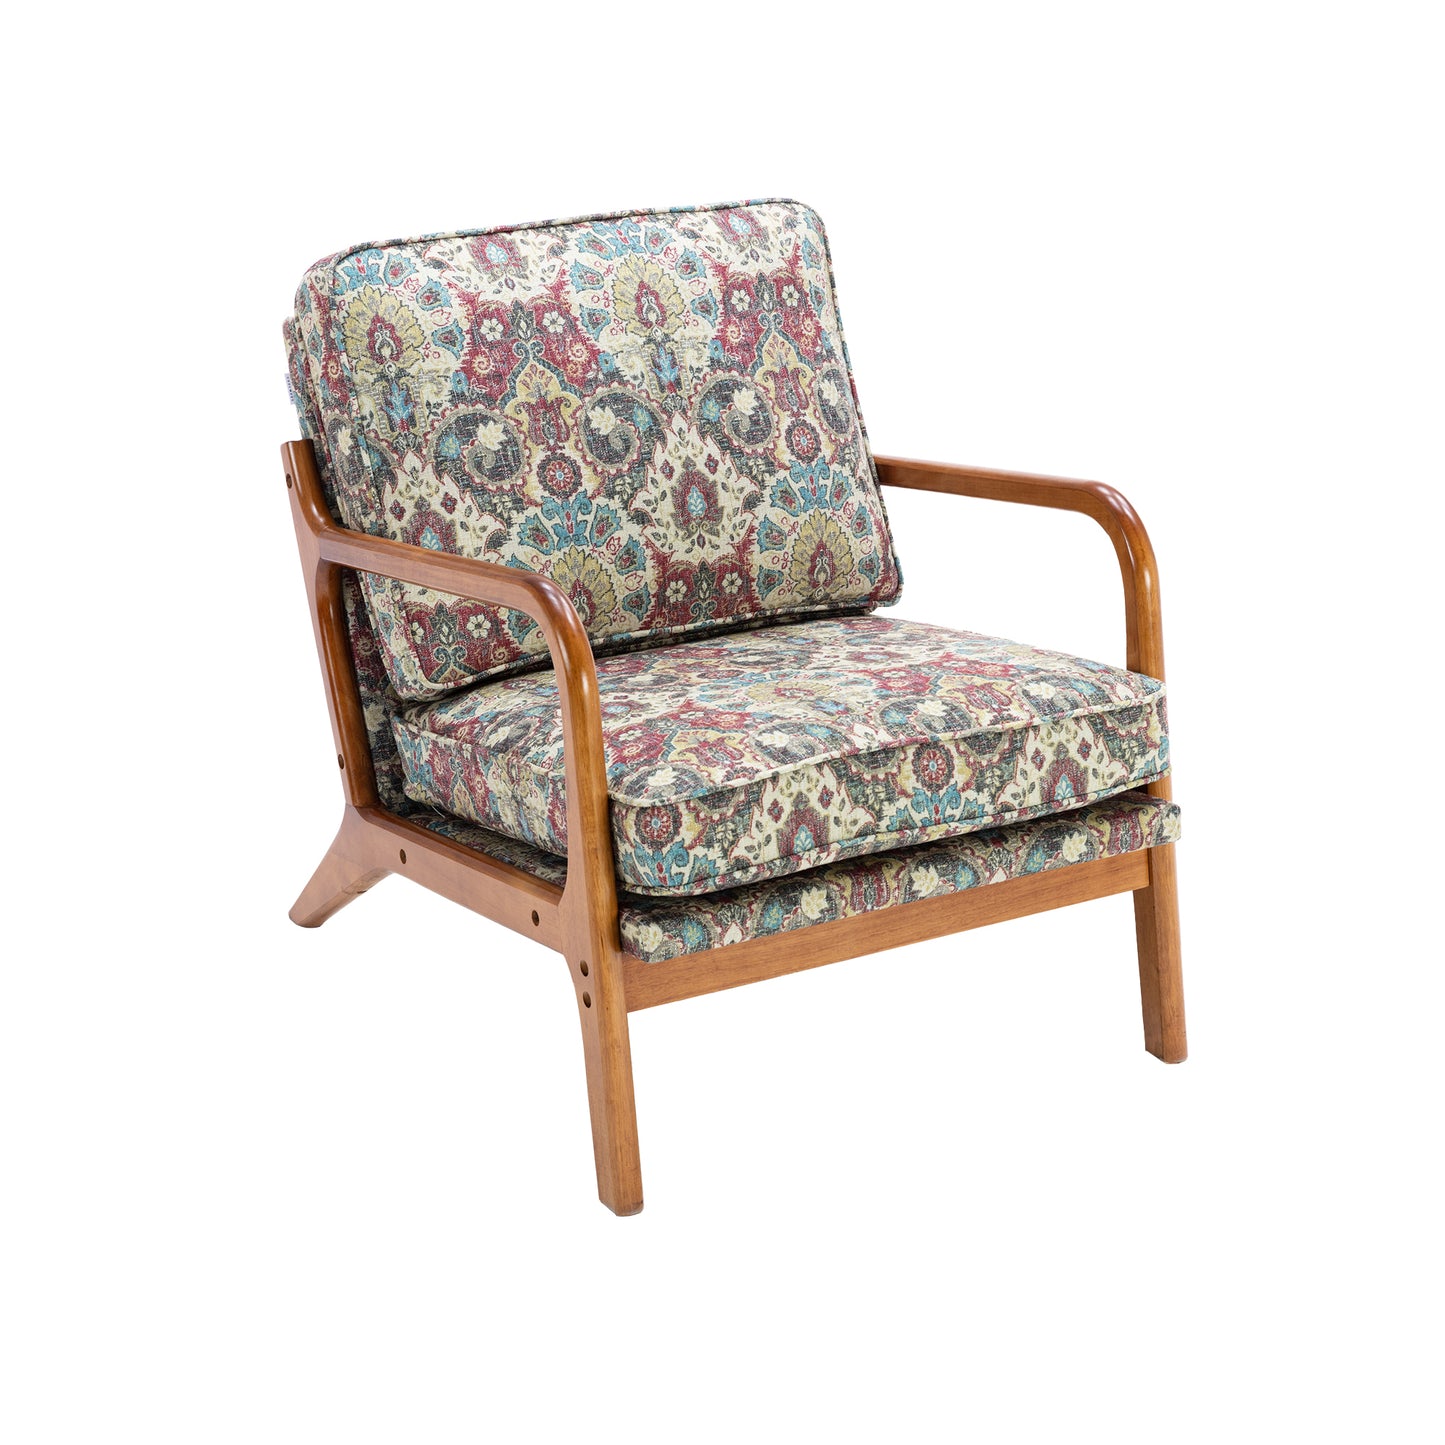 Gipsy, Solid Wood Frame Armchair for Living Room